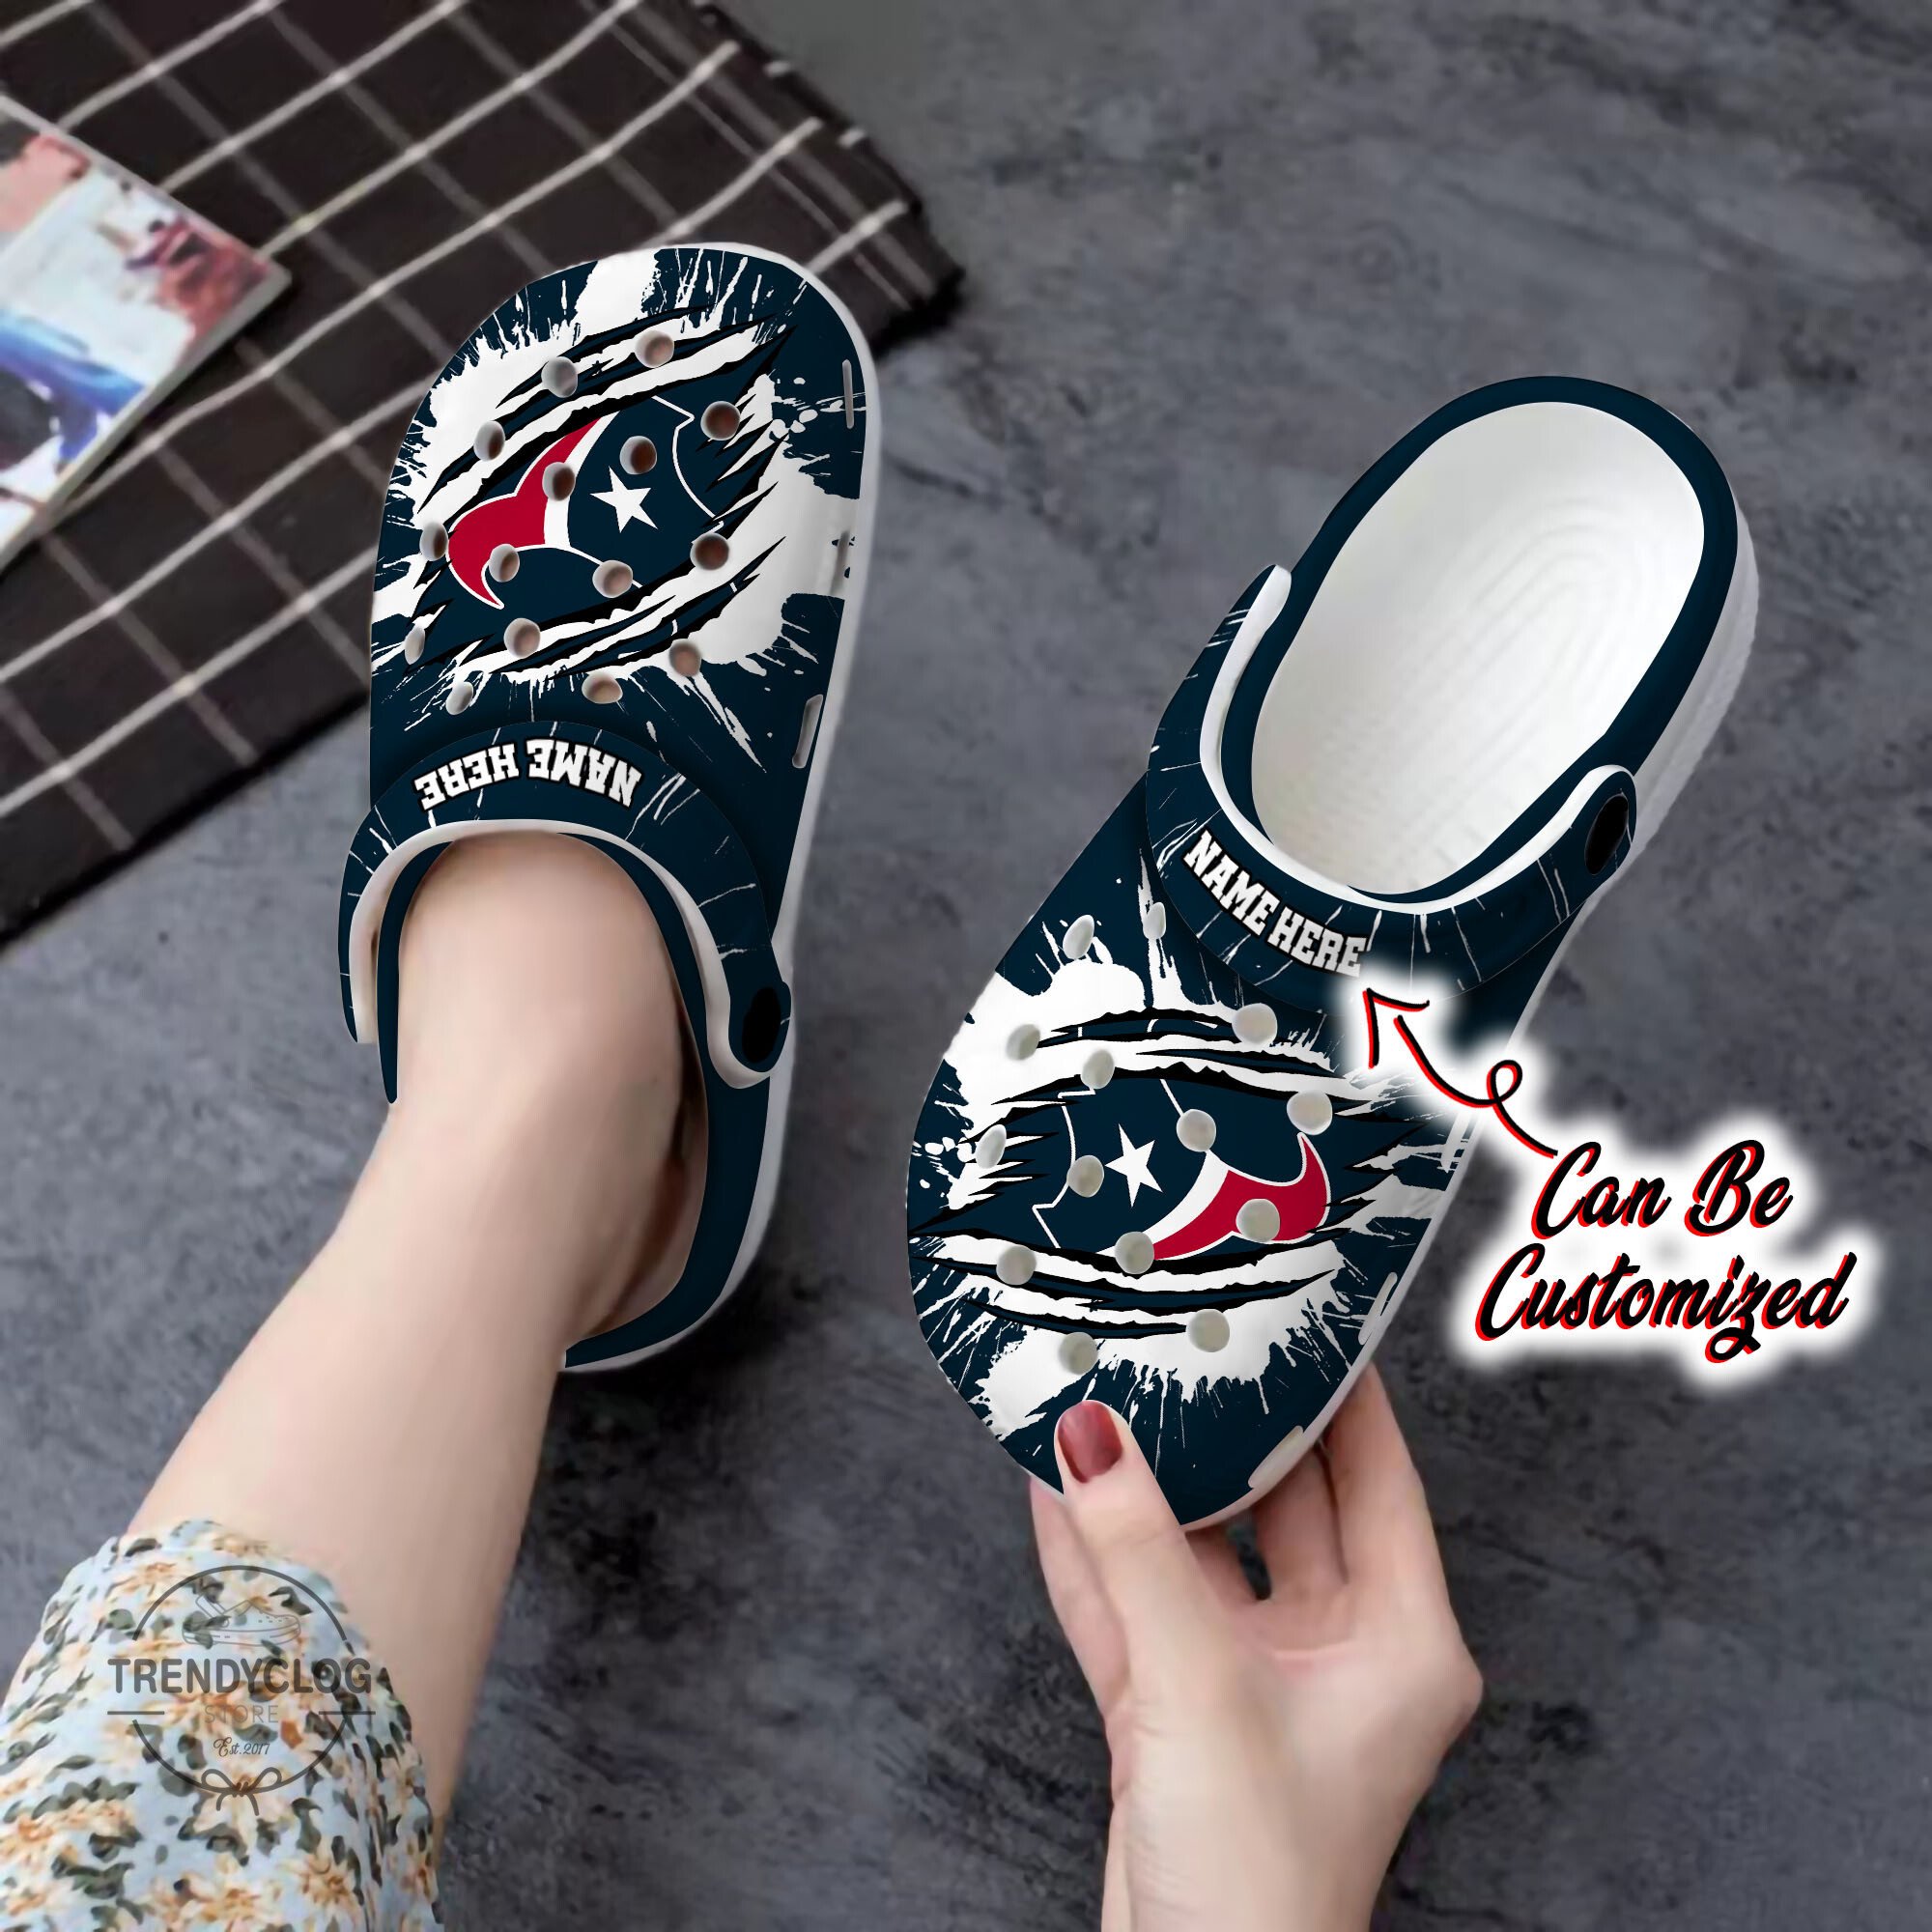 Texans Crocss – Personalized H.Texans Football Ripped Claw Clog Shoes ...